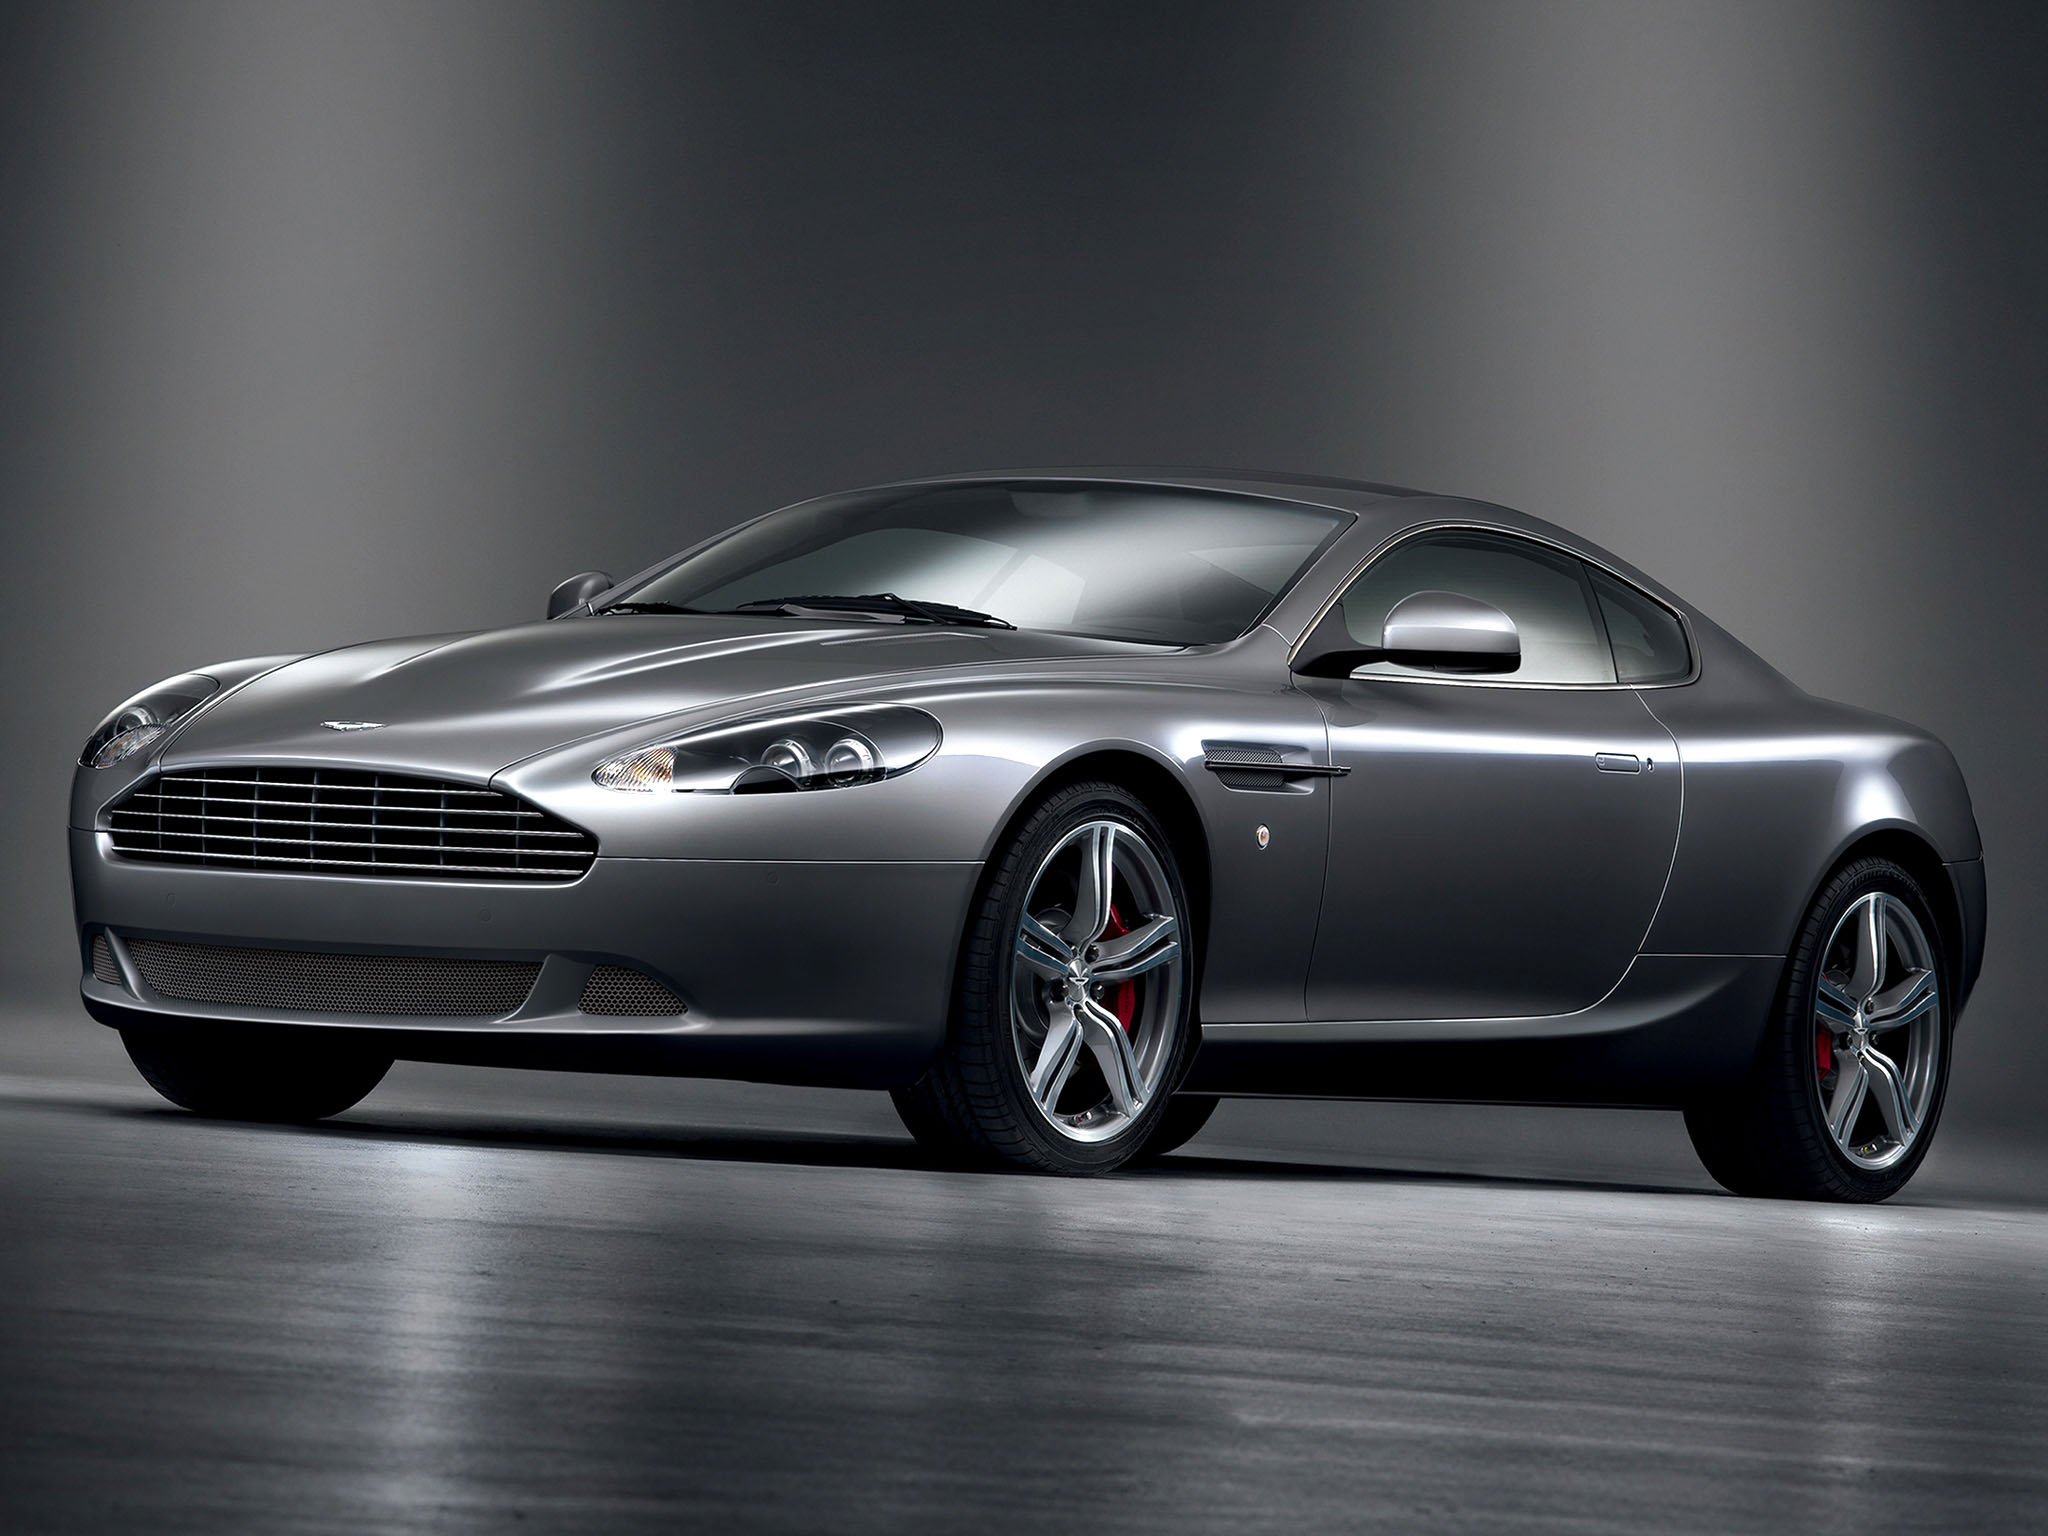 Aston Martin DB9 Review | 2013 DB9 Coupe Update